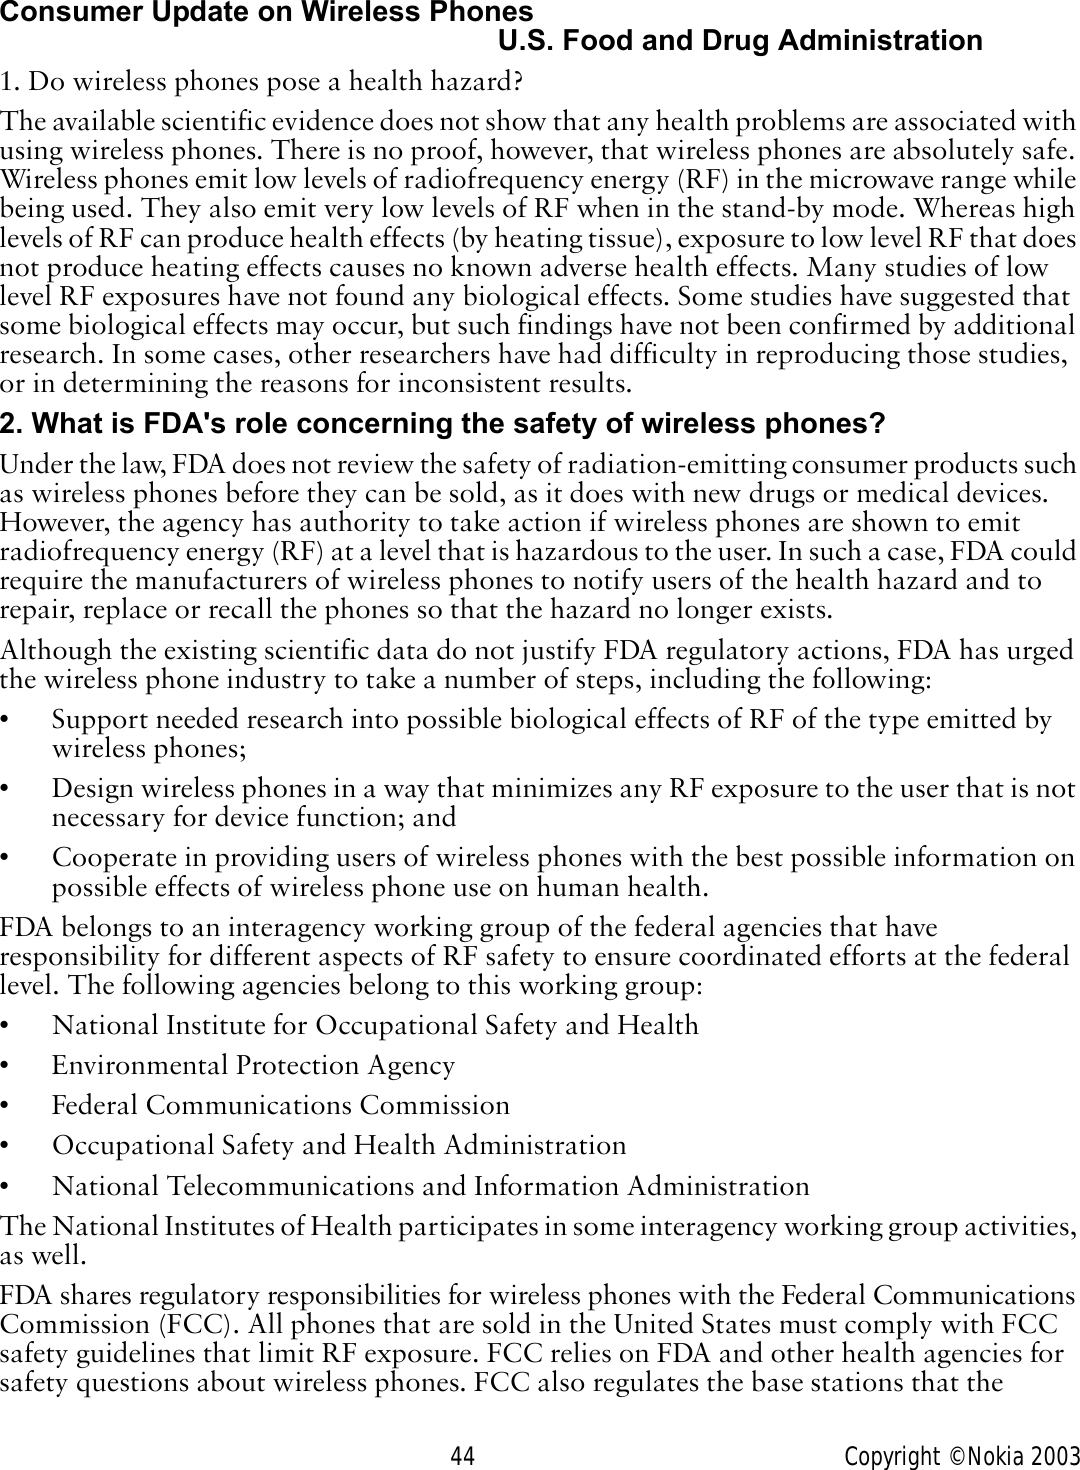 44 Copyright © Nokia 2003Consumer Update on Wireless PhonesU.S. Food and Drug Administration1. Do wireless phones pose a health hazard?The available scientific evidence does not show that any health problems are associated with using wireless phones. There is no proof, however, that wireless phones are absolutely safe. Wireless phones emit low levels of radiofrequency energy (RF) in the microwave range while being used. They also emit very low levels of RF when in the stand-by mode. Whereas high levels of RF can produce health effects (by heating tissue), exposure to low level RF that does not produce heating effects causes no known adverse health effects. Many studies of low level RF exposures have not found any biological effects. Some studies have suggested that some biological effects may occur, but such findings have not been confirmed by additional research. In some cases, other researchers have had difficulty in reproducing those studies, or in determining the reasons for inconsistent results.2. What is FDA&apos;s role concerning the safety of wireless phones?Under the law, FDA does not review the safety of radiation-emitting consumer products such as wireless phones before they can be sold, as it does with new drugs or medical devices. However, the agency has authority to take action if wireless phones are shown to emit radiofrequency energy (RF) at a level that is hazardous to the user. In such a case, FDA could require the manufacturers of wireless phones to notify users of the health hazard and to repair, replace or recall the phones so that the hazard no longer exists.Although the existing scientific data do not justify FDA regulatory actions, FDA has urged the wireless phone industry to take a number of steps, including the following:• Support needed research into possible biological effects of RF of the type emitted by wireless phones;• Design wireless phones in a way that minimizes any RF exposure to the user that is not necessary for device function; and• Cooperate in providing users of wireless phones with the best possible information on possible effects of wireless phone use on human health.FDA belongs to an interagency working group of the federal agencies that have responsibility for different aspects of RF safety to ensure coordinated efforts at the federal level. The following agencies belong to this working group:• National Institute for Occupational Safety and Health• Environmental Protection Agency• Federal Communications Commission• Occupational Safety and Health Administration• National Telecommunications and Information AdministrationThe National Institutes of Health participates in some interagency working group activities, as well.FDA shares regulatory responsibilities for wireless phones with the Federal Communications Commission (FCC). All phones that are sold in the United States must comply with FCC safety guidelines that limit RF exposure. FCC relies on FDA and other health agencies for safety questions about wireless phones. FCC also regulates the base stations that the 